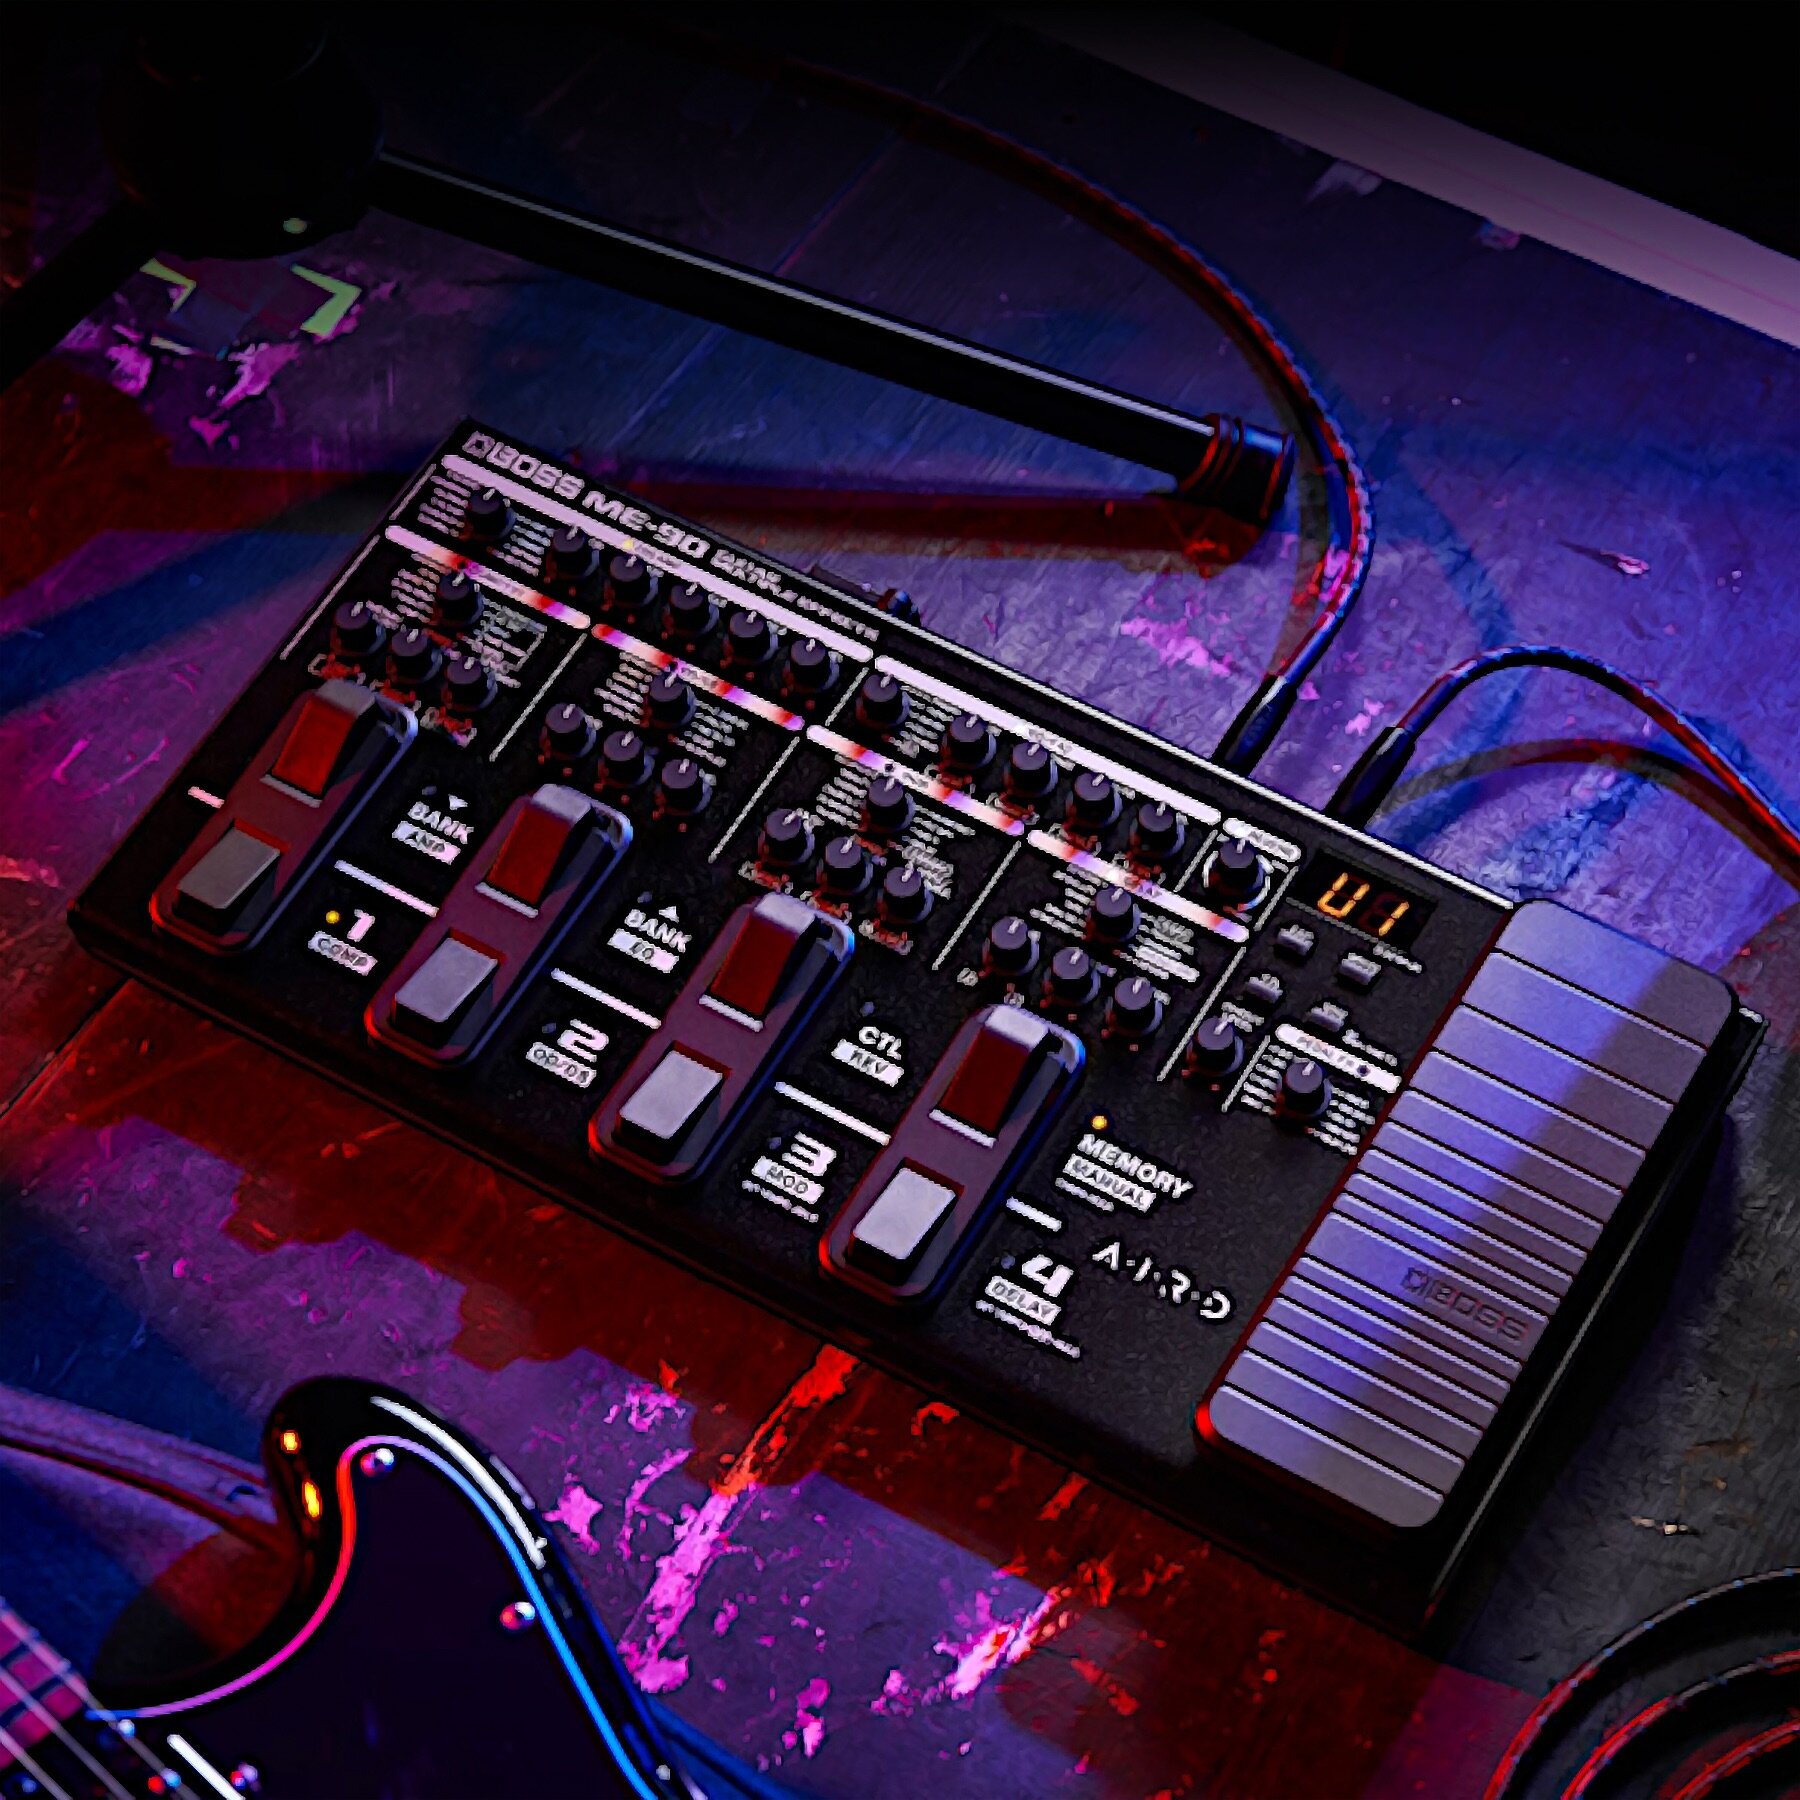 We are super excited about this new arrival! The new ME-90 multi effects pedal from Boss packs a rich variety of killer effects into an easy-to-use, pedal-based format. You don&rsquo;t have to go menu diving to find great sounds; just select the effe